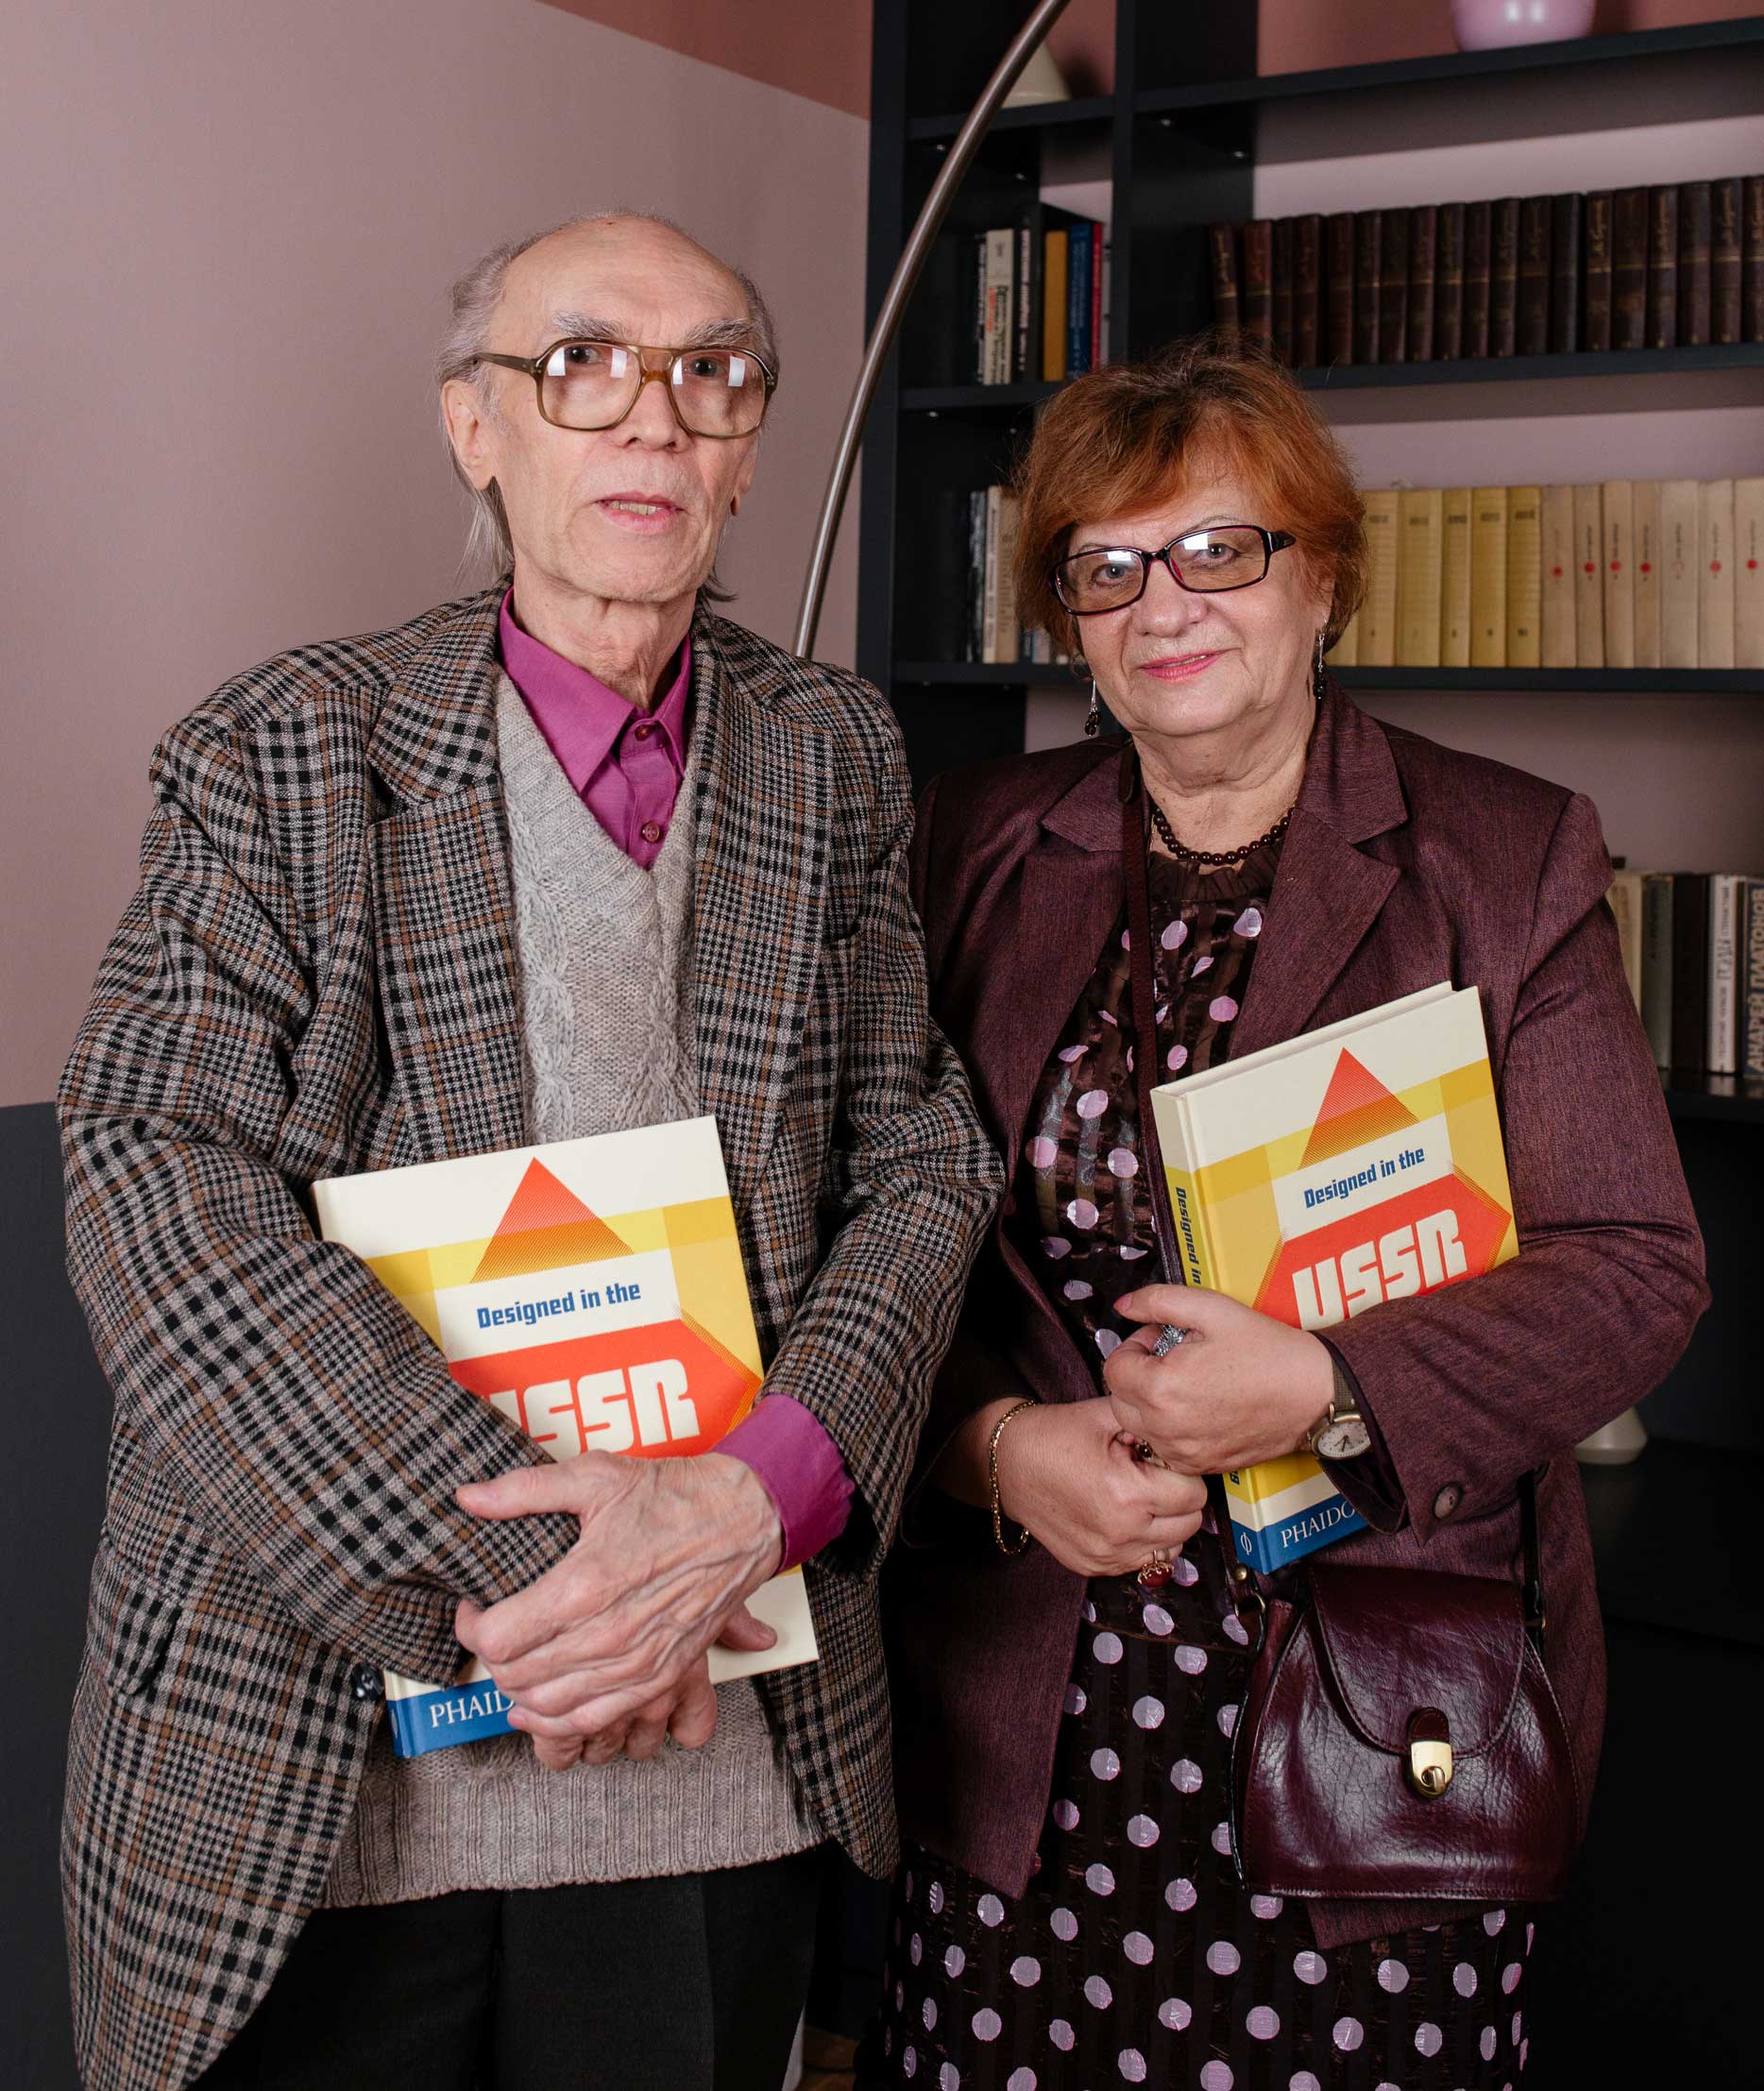 Two of the designers featured in Designed in the USSR: 1950-1989 holding a copy of the book photographed at the Tretiakov Gallery in Moscow last month Left: Alexander Grashin right unknown